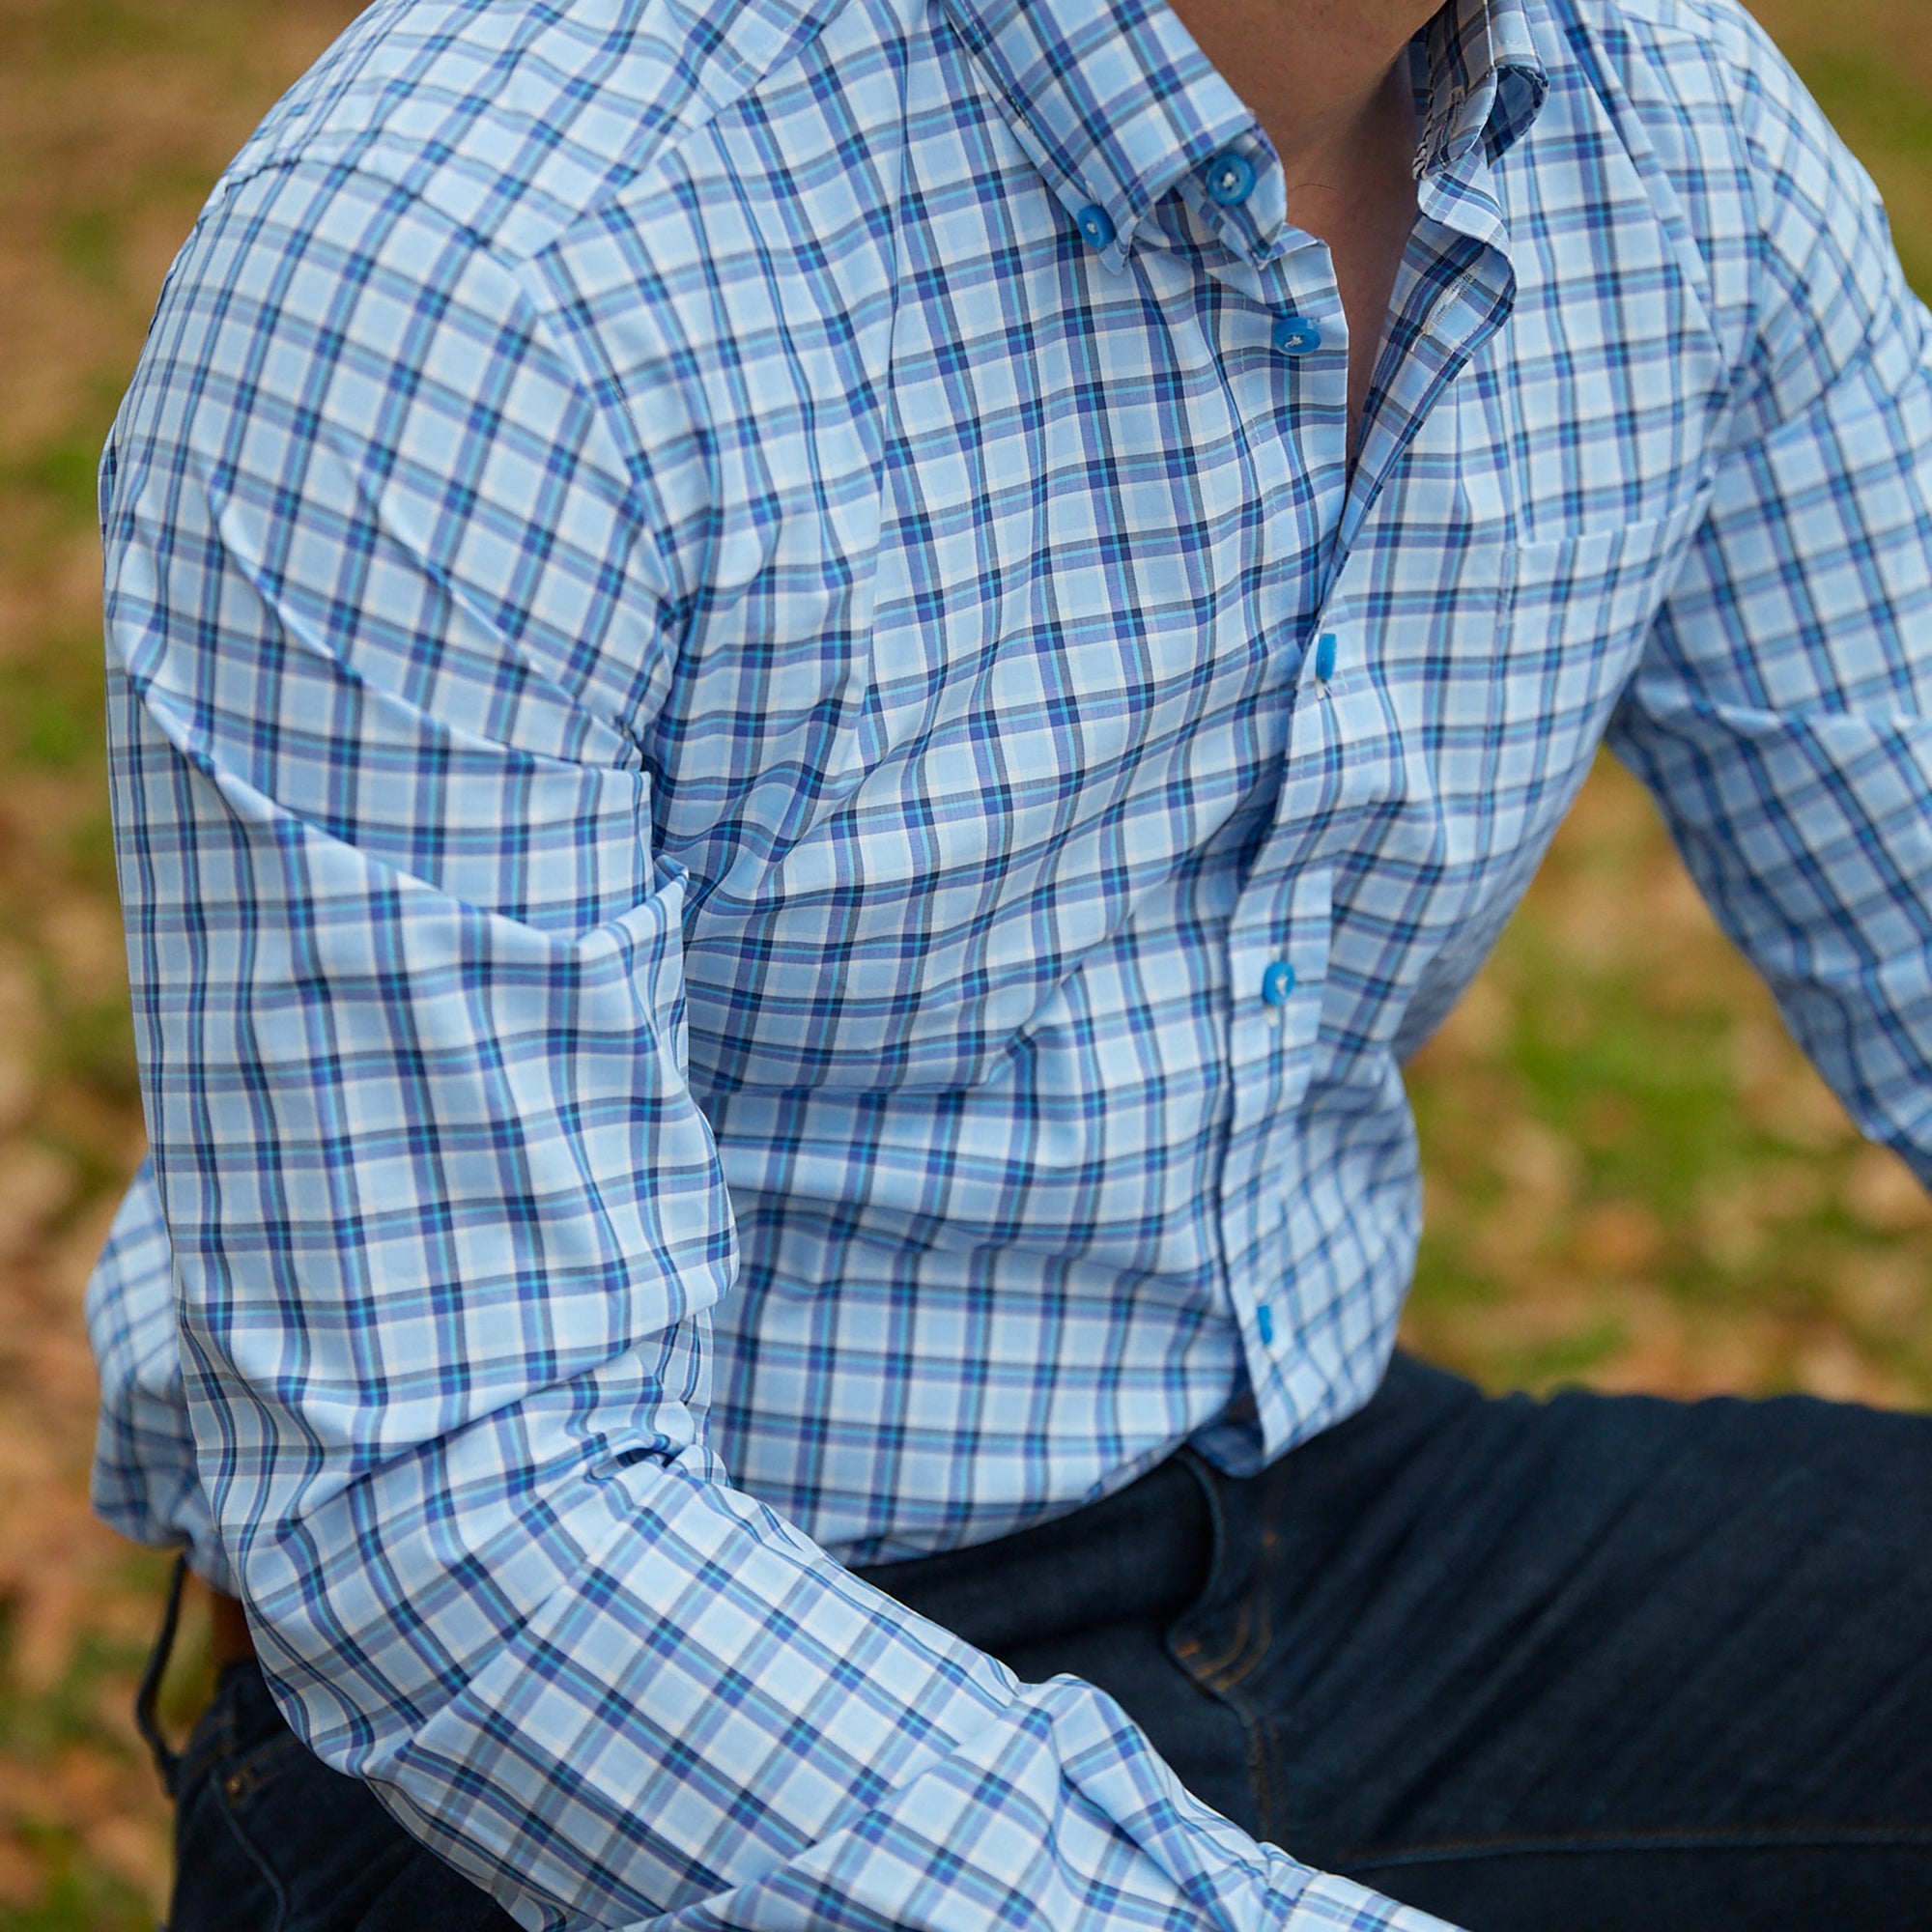 Enjoy the luxury of 100% cotton, Italian made quality, and bold navy & light blue plaid.  100% Cotton • Button Down Collar • Long Sleeve • Contrast Buttons • Chest Pocket • Machine Washable • Made in Italy 